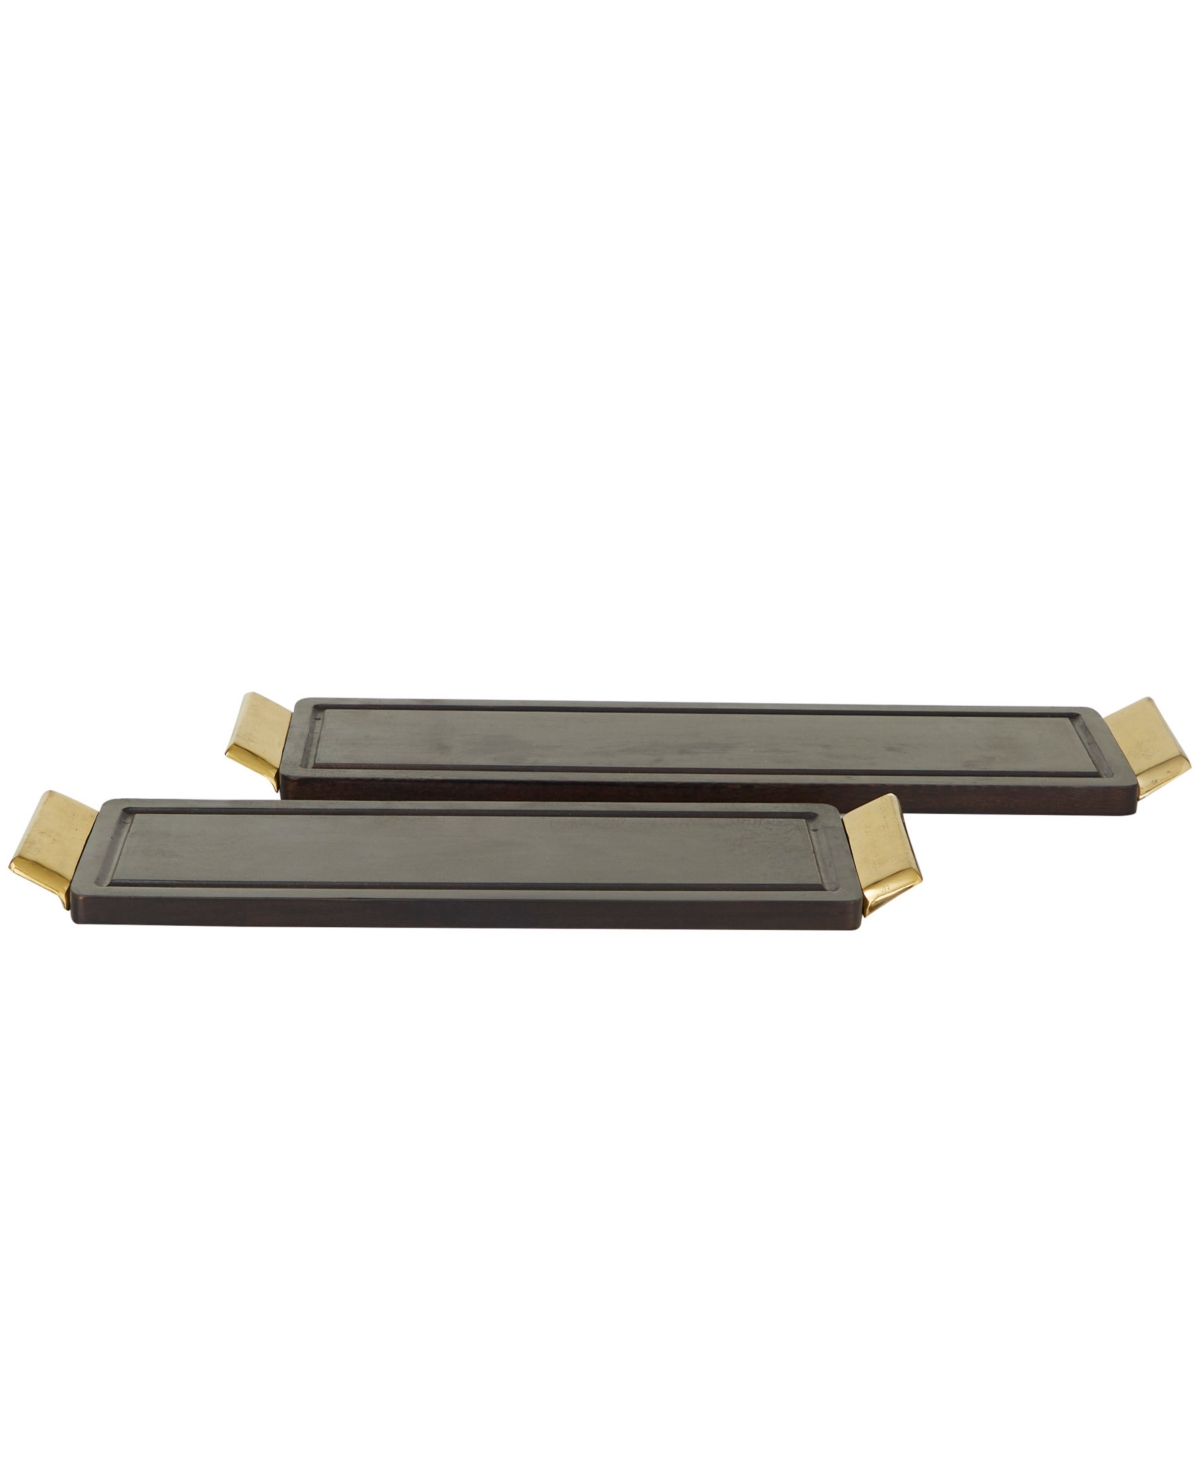 Rosemary Lane Dark Wood Tray With Metal Handles, Set Of 2, 27", 23" W In Gold